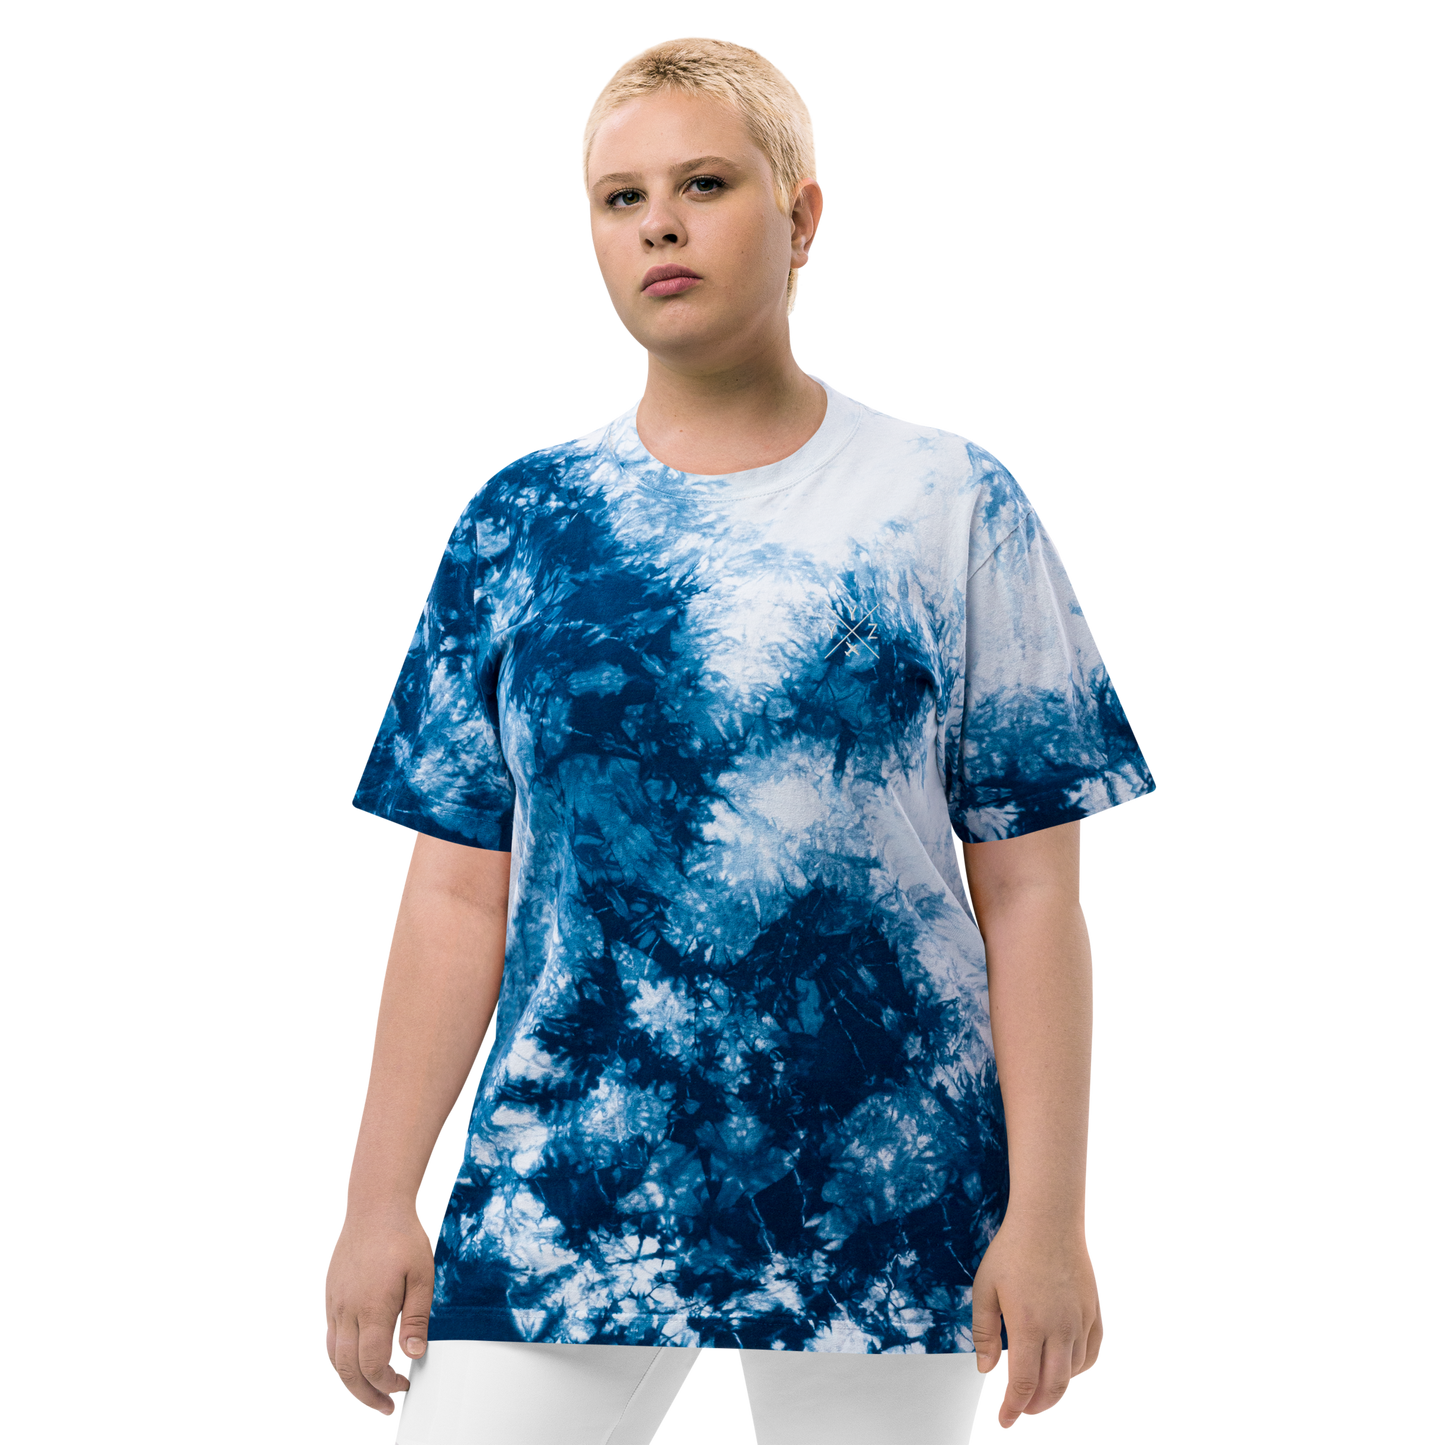 YHM Designs - YYZ Toronto Oversized Tie-Dye T-Shirt - Crossed-X Design with Airport Code and Vintage Propliner - White Embroidery - Image 08